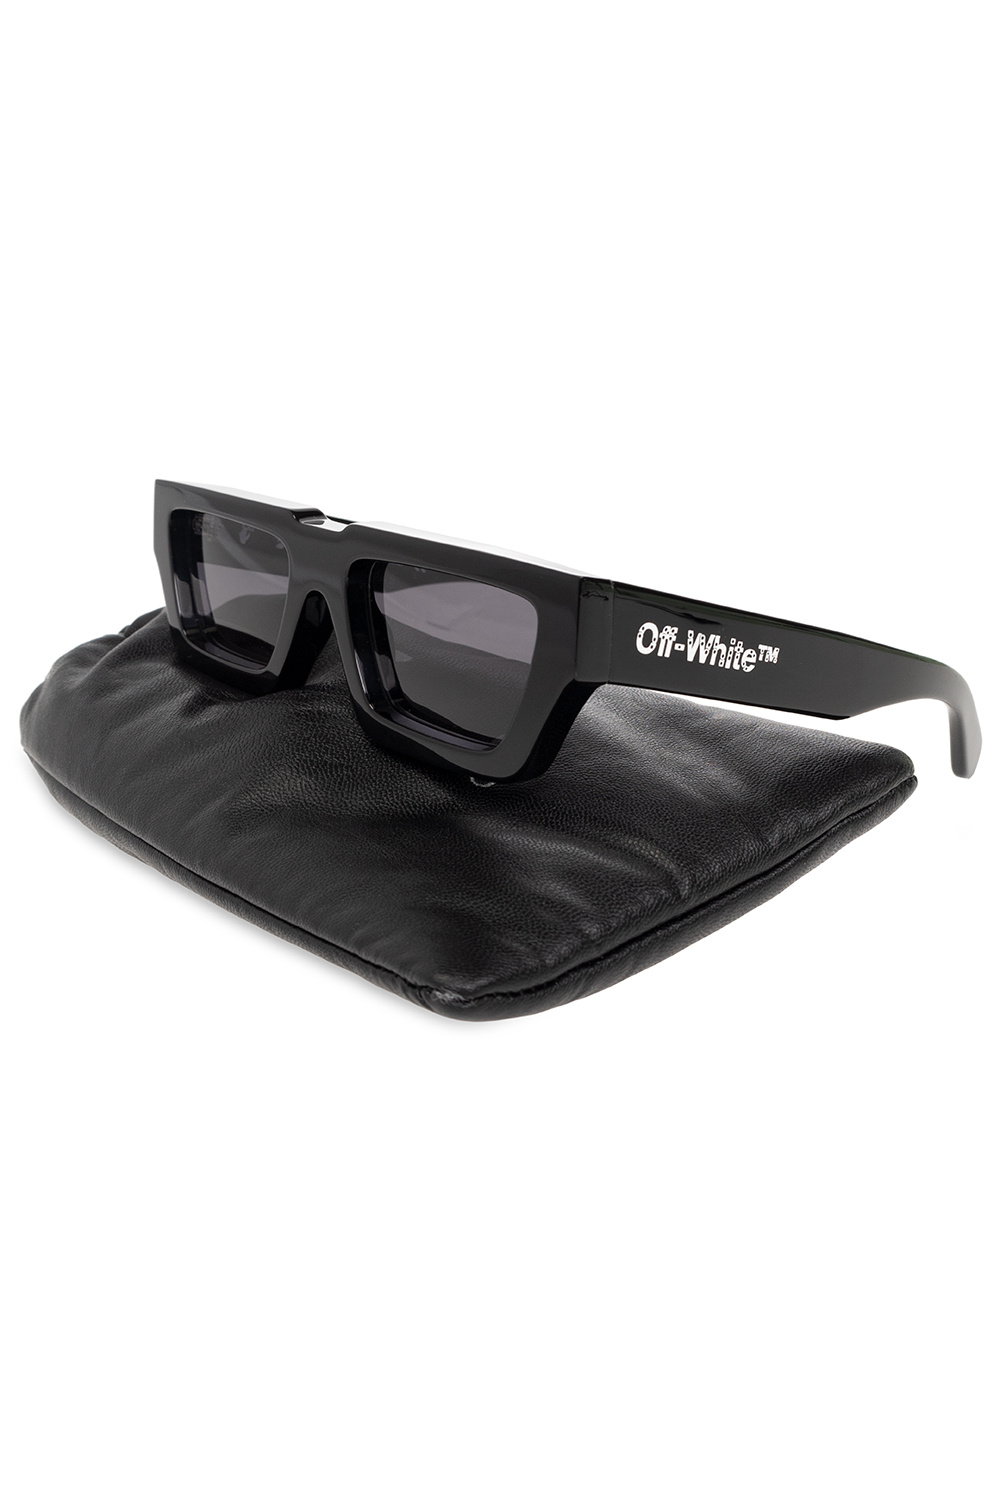 Reviewing: Off White™️ S/S 2020 Sunglasses 